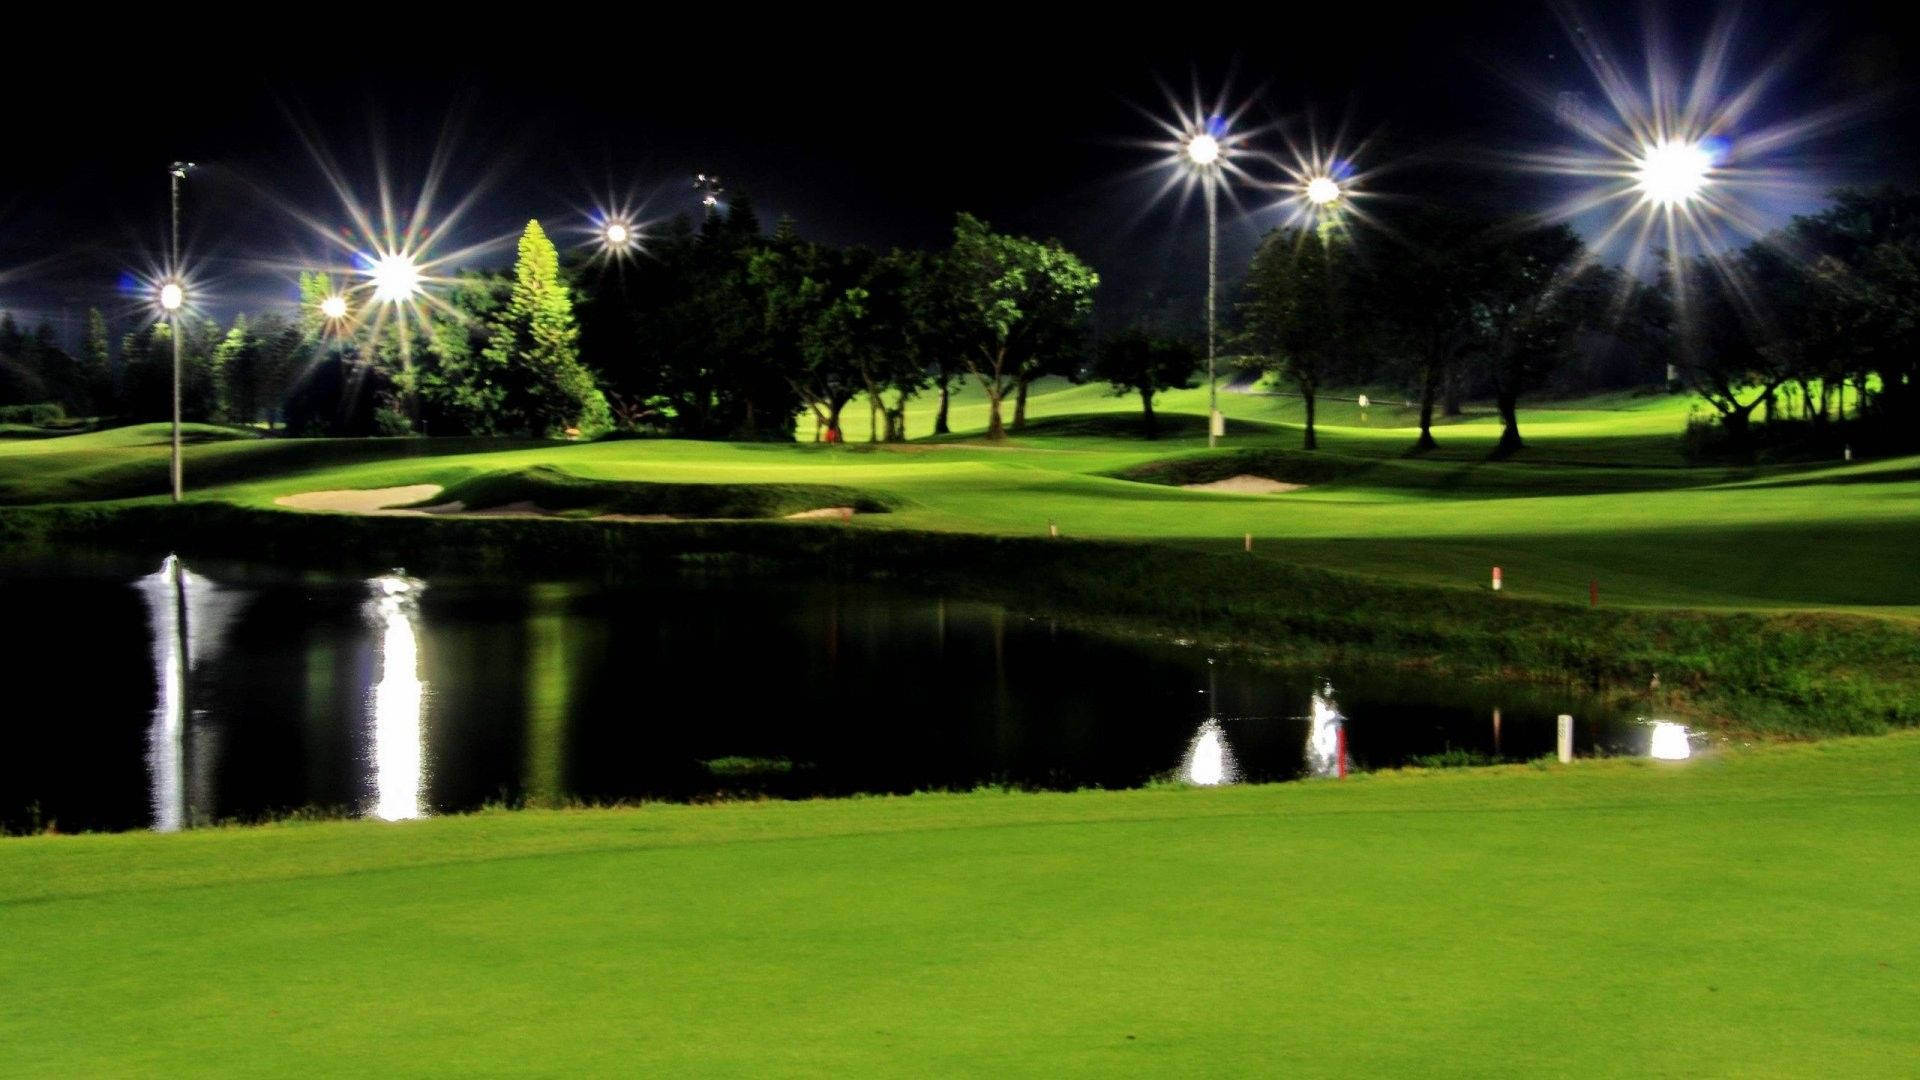 Cool Golf Course Night View